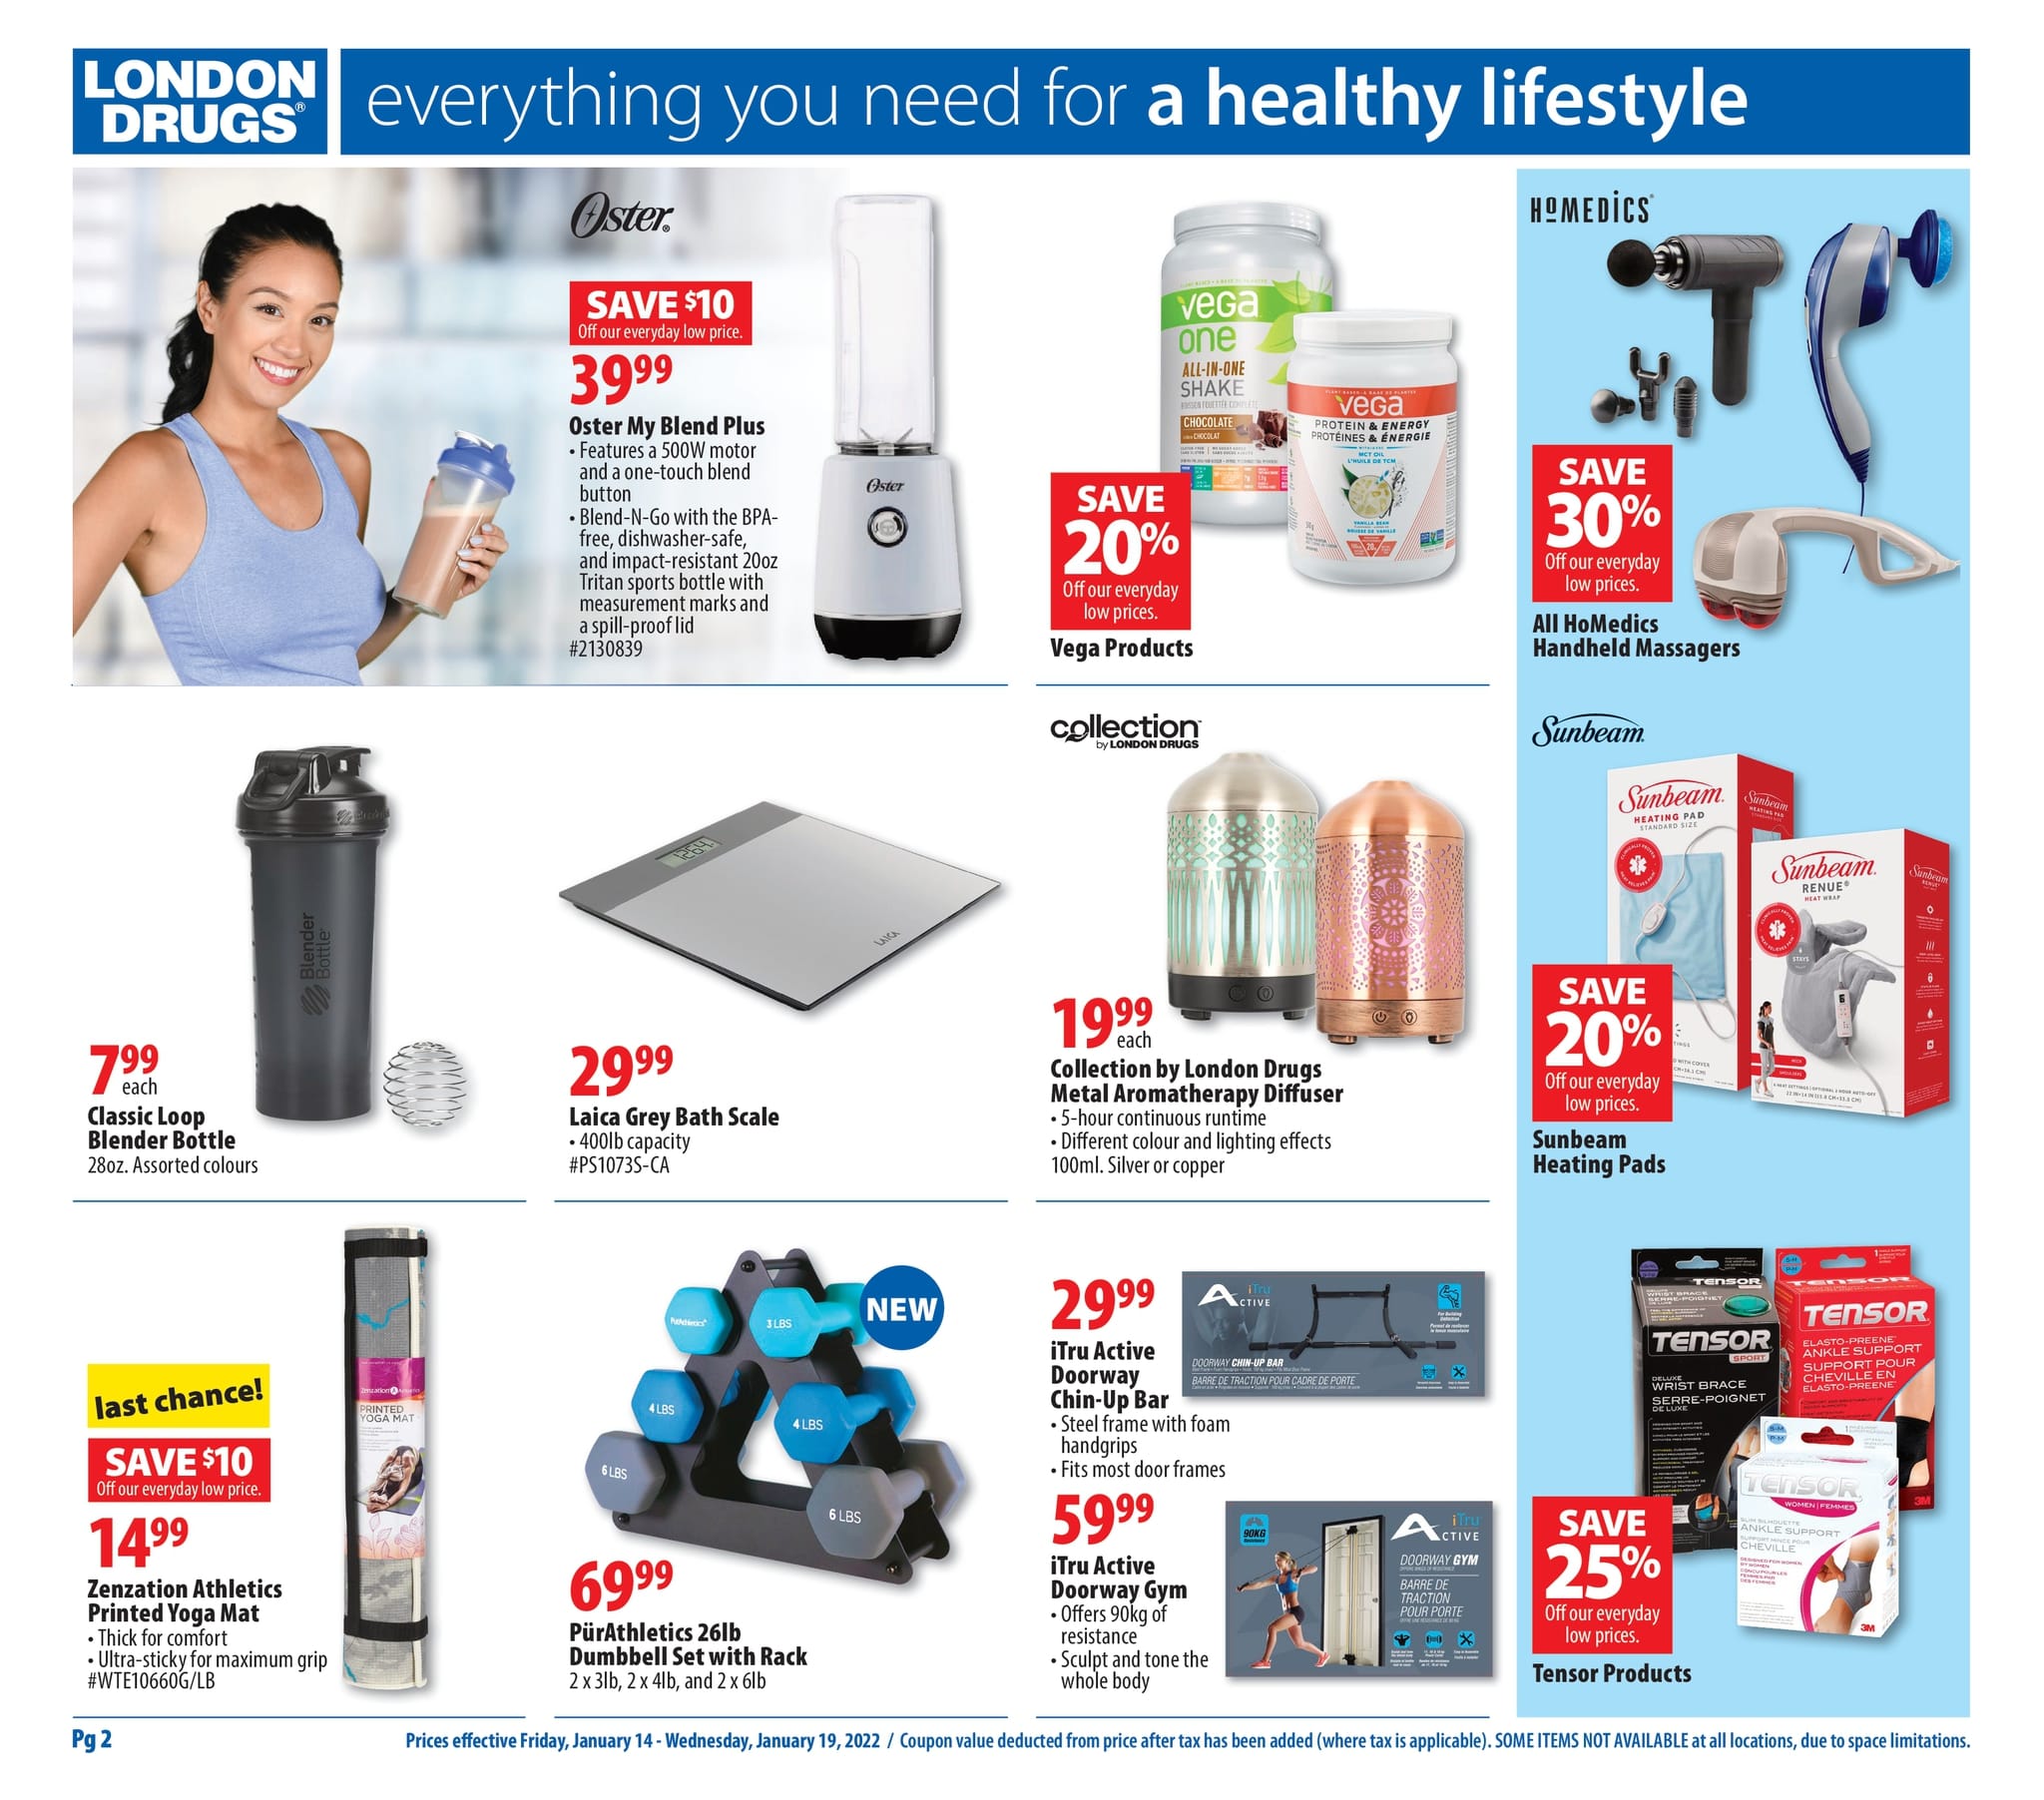 London Drugs - Weekly Flyer Specials - Page 2